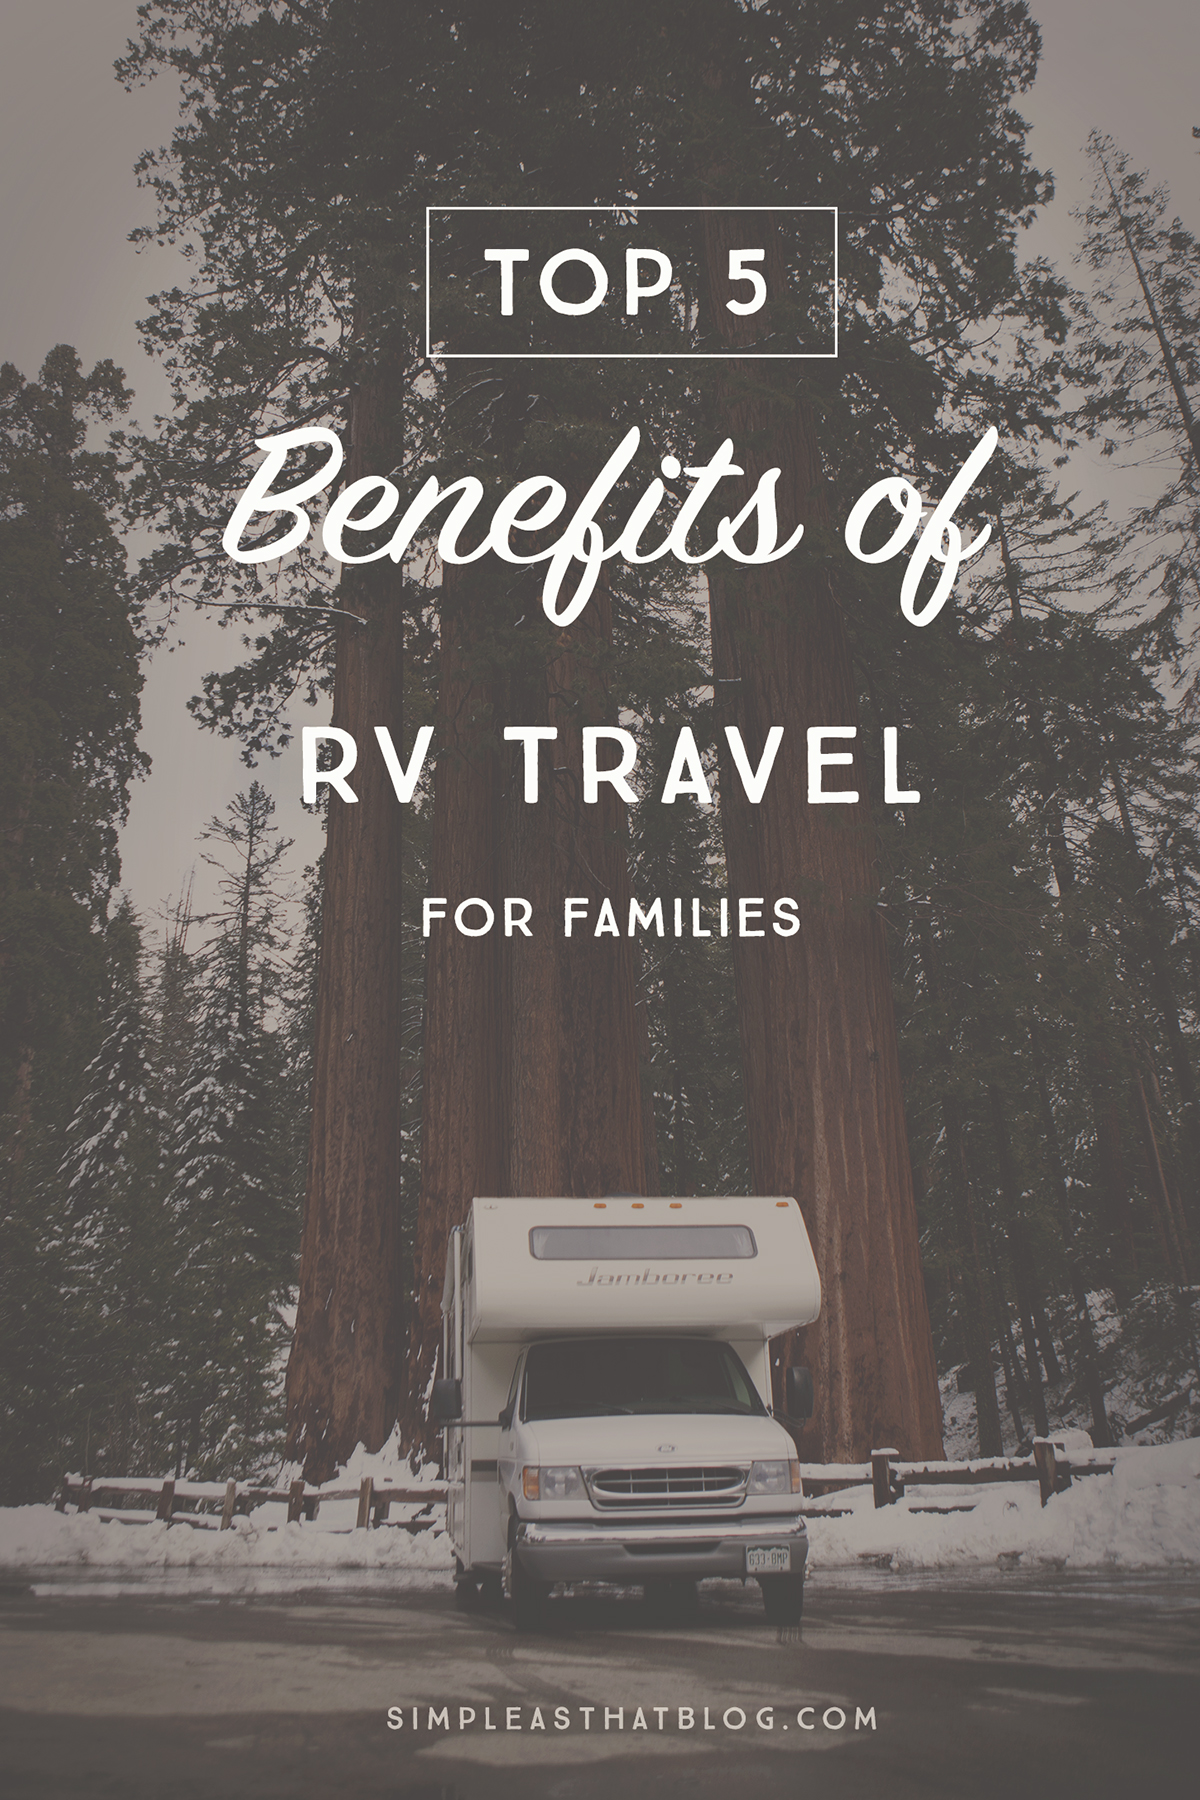 When your "home away from home" is on WHEELS, good things happen. | Top 5 Benefits of RV Travel for Families